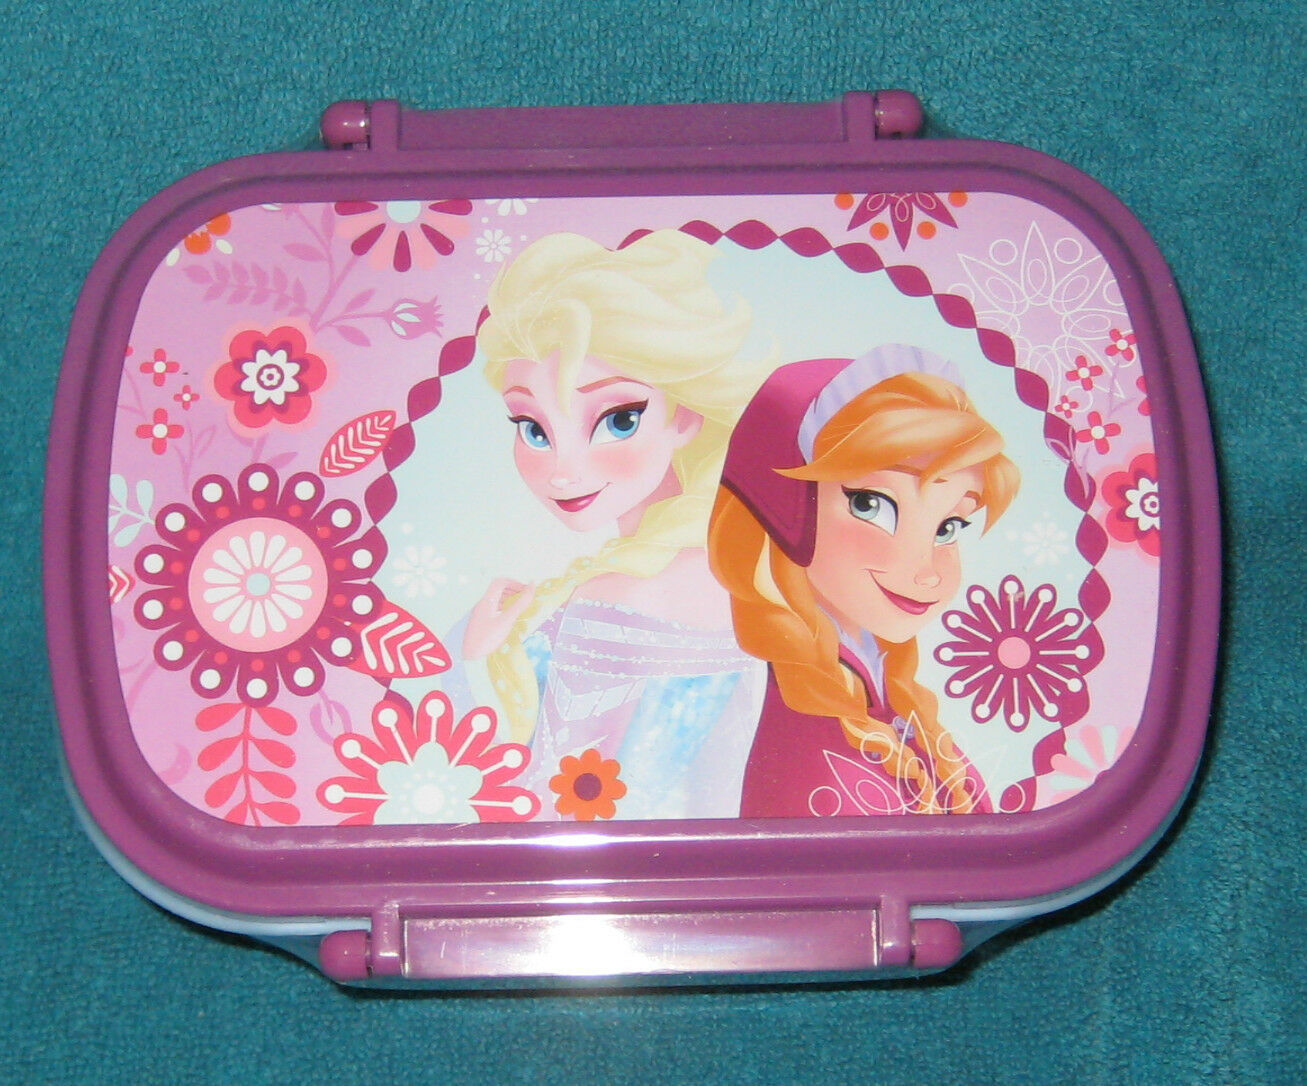 Primary image for Disney Store Frozen Elsa and Anna Snack or Lunch Box. Removable Compartment. New